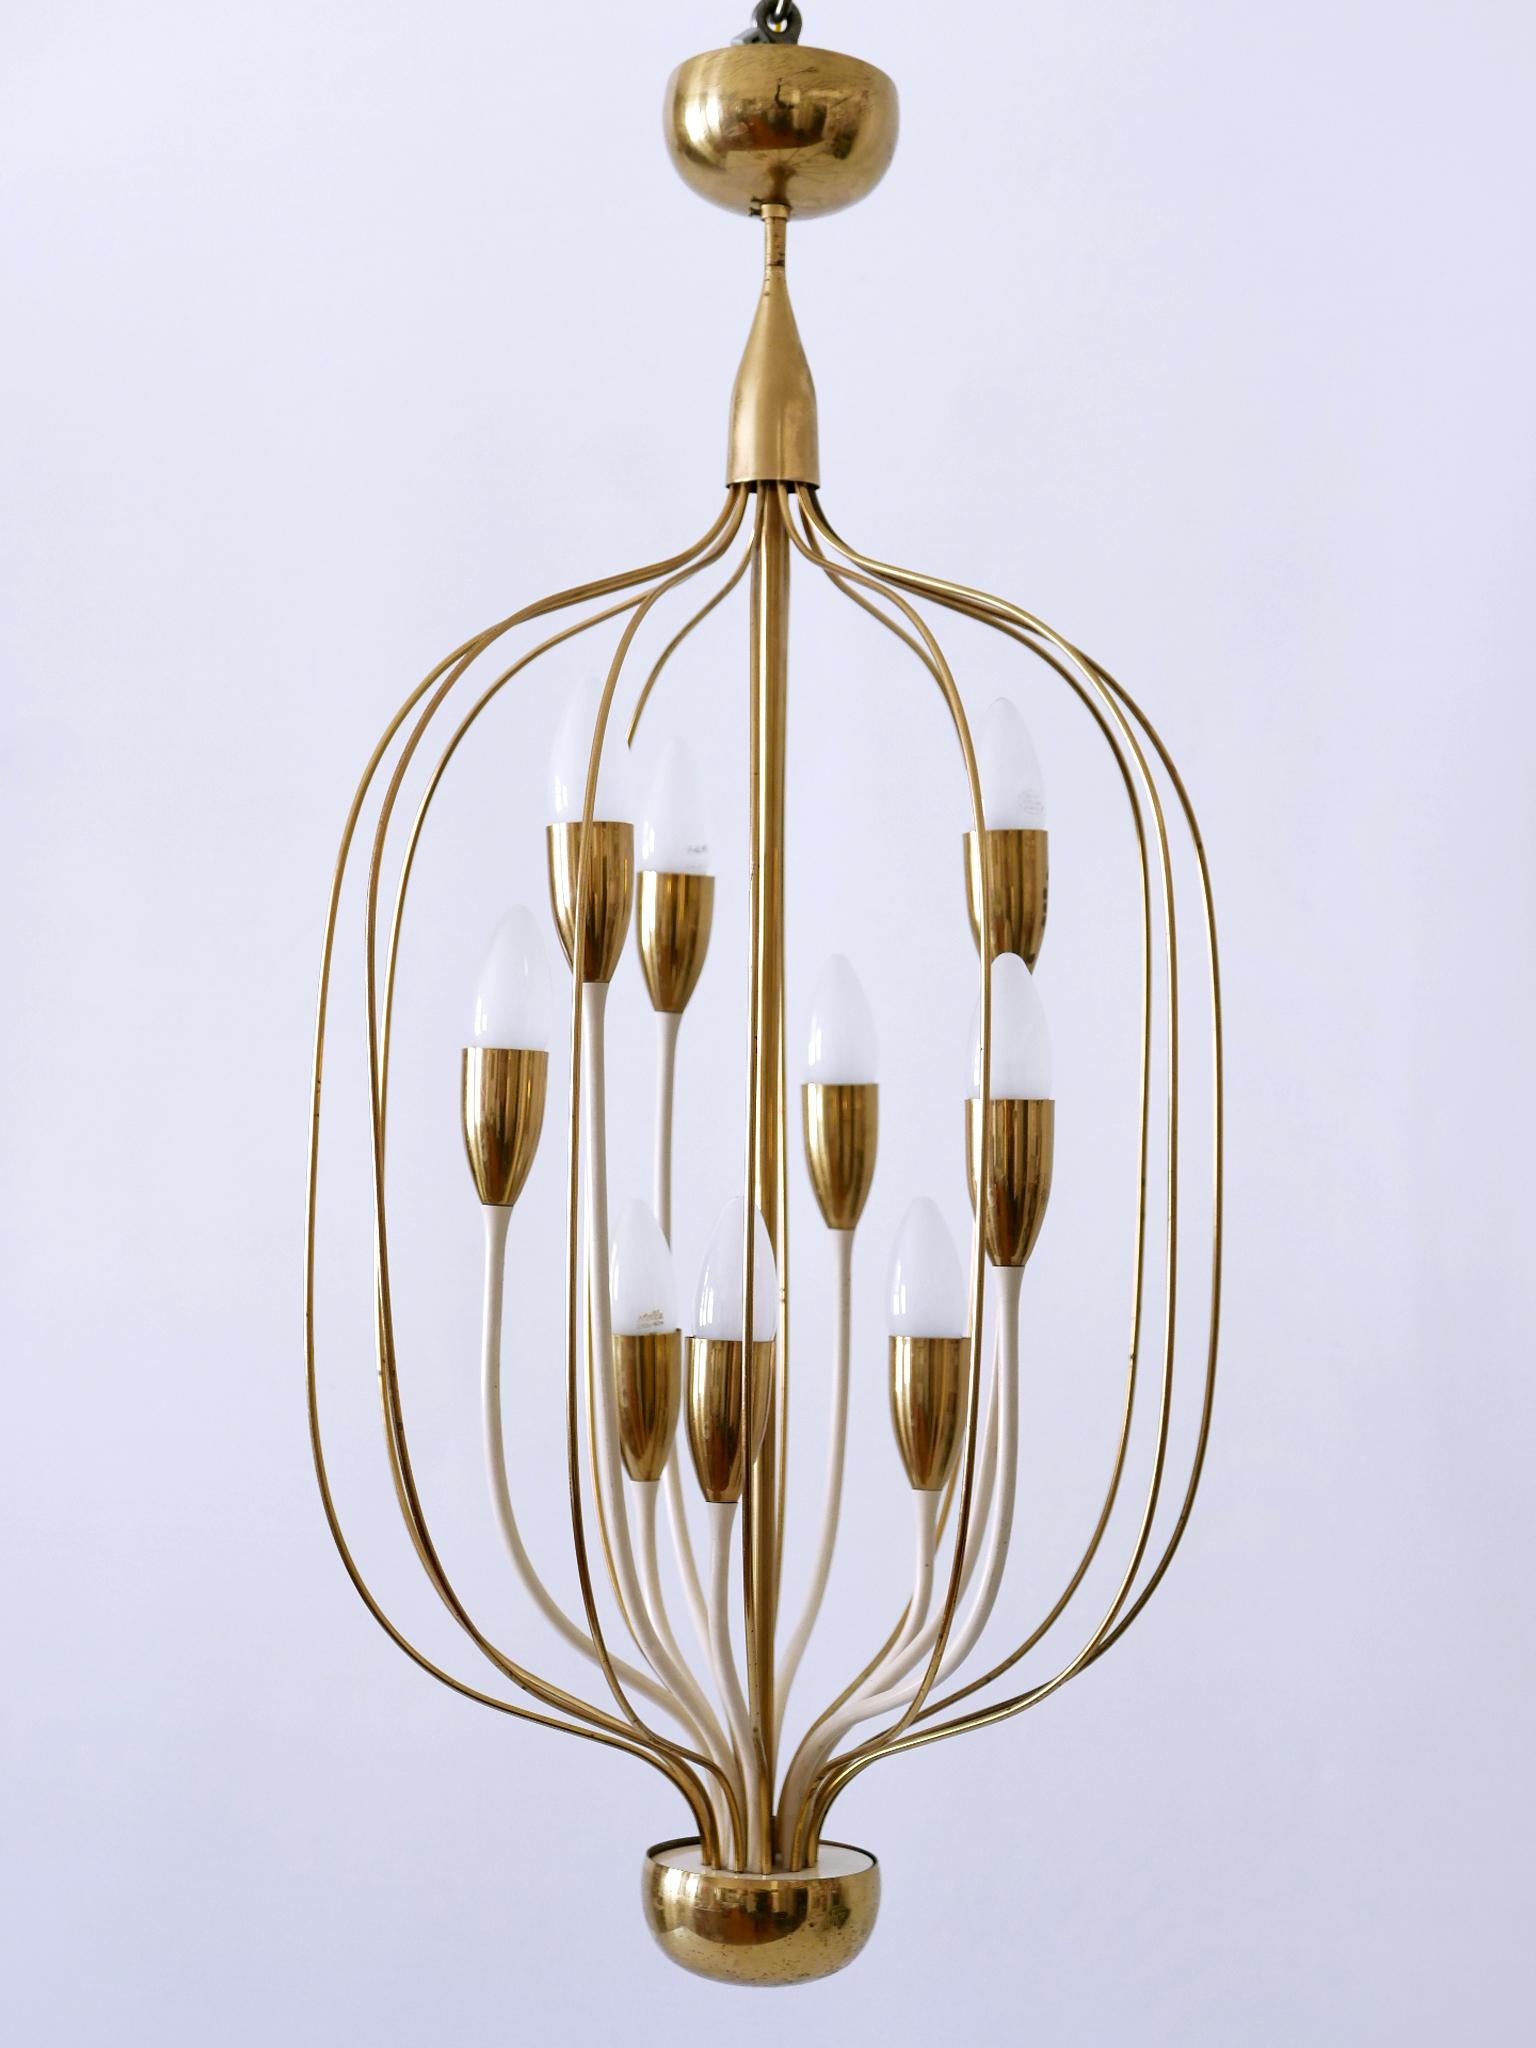 German Exceptional Mid-Century Modern Nine-Flamed Chandelier or Pendant Lamp 1950s For Sale